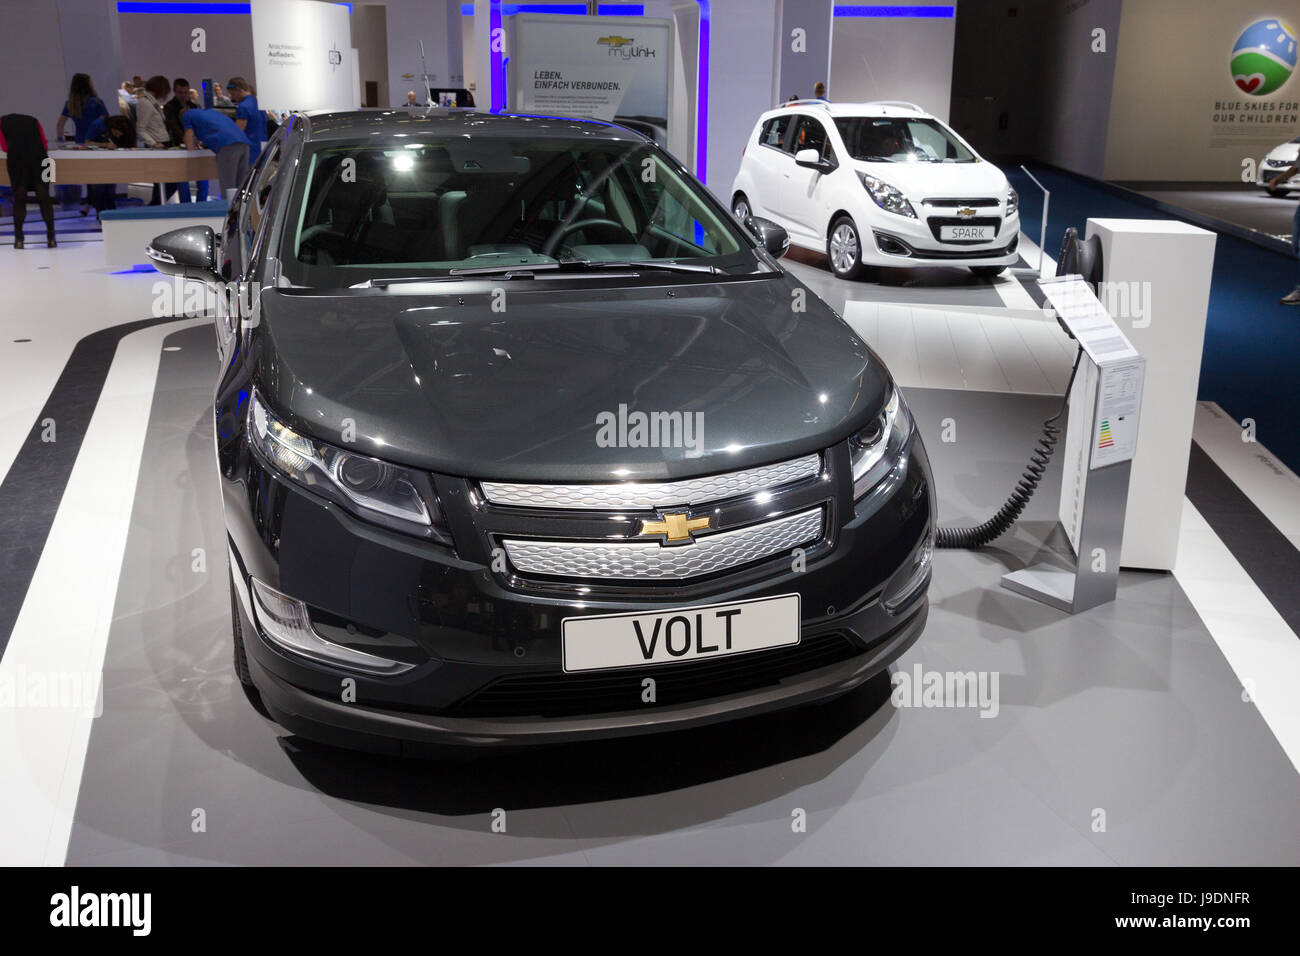 FRANKFURT, GERMANY - SEP 13: Chevrolet Volt electric car at IAA motor show on Sep 13, 2013 in Frankfurt. More than 1.000 exhibitors from 35 countries  Stock Photo